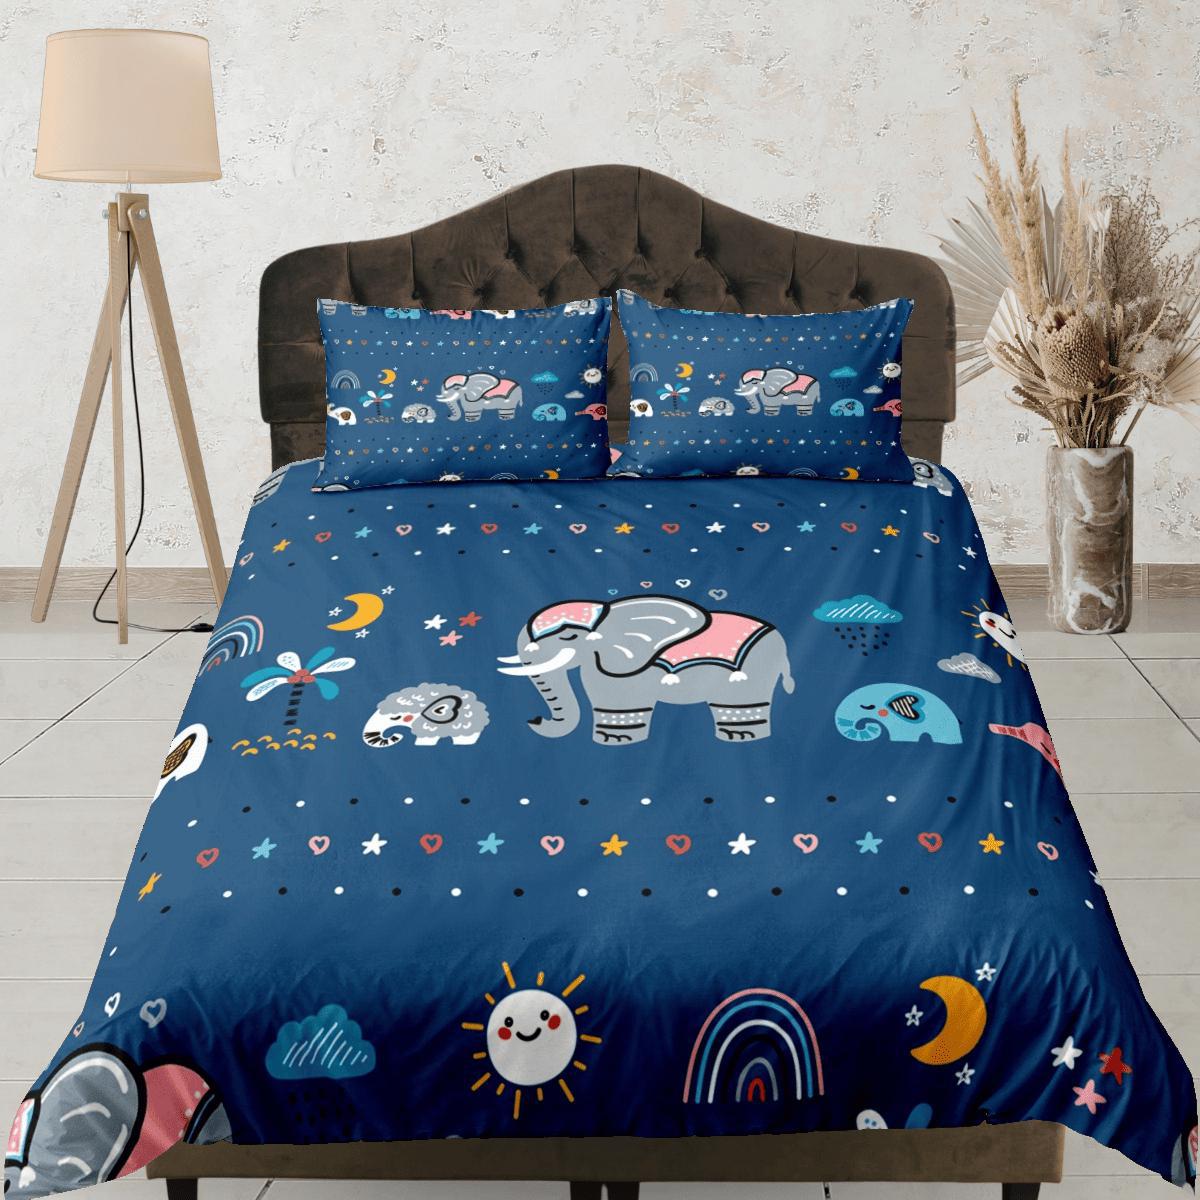 daintyduvet Elephant Blue Duvet Cover Set Colorful Bedspread, Kids Full Bedding Set with Pillowcase, Comforter Cover Twin